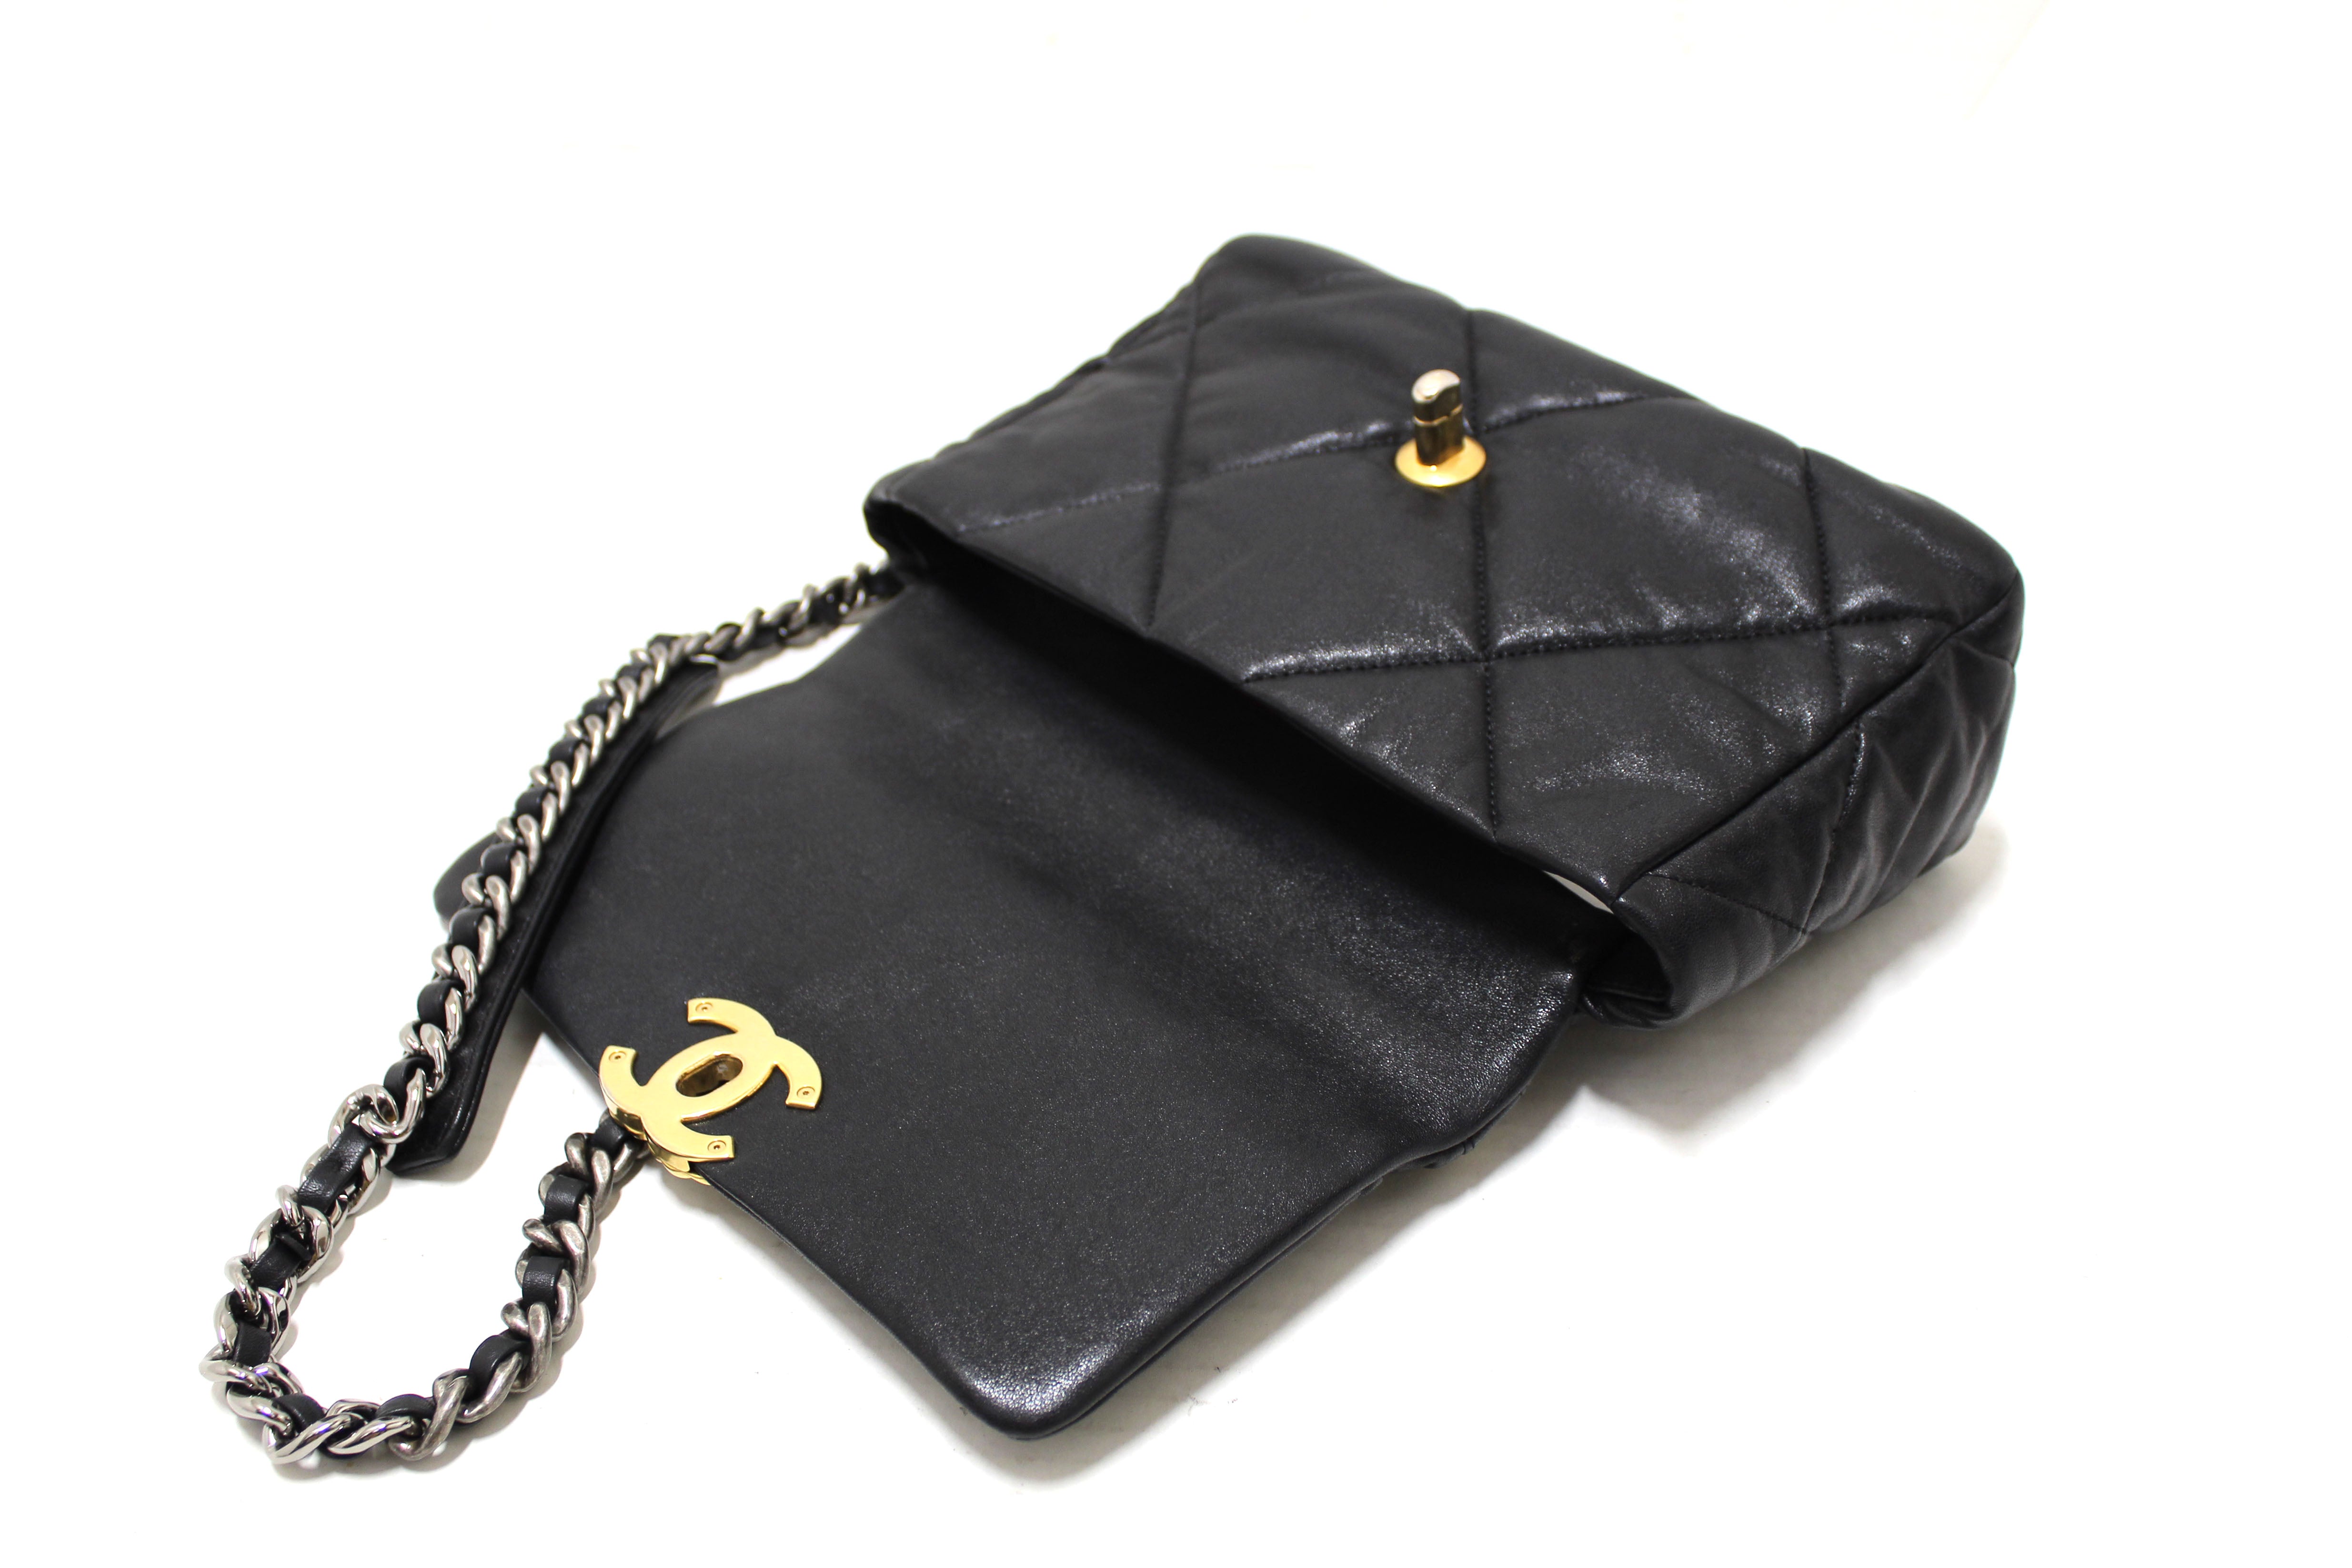 Authentic Chanel 19 Medium Black Quilted Lambskin Leather Shoulder Crossbody Bag